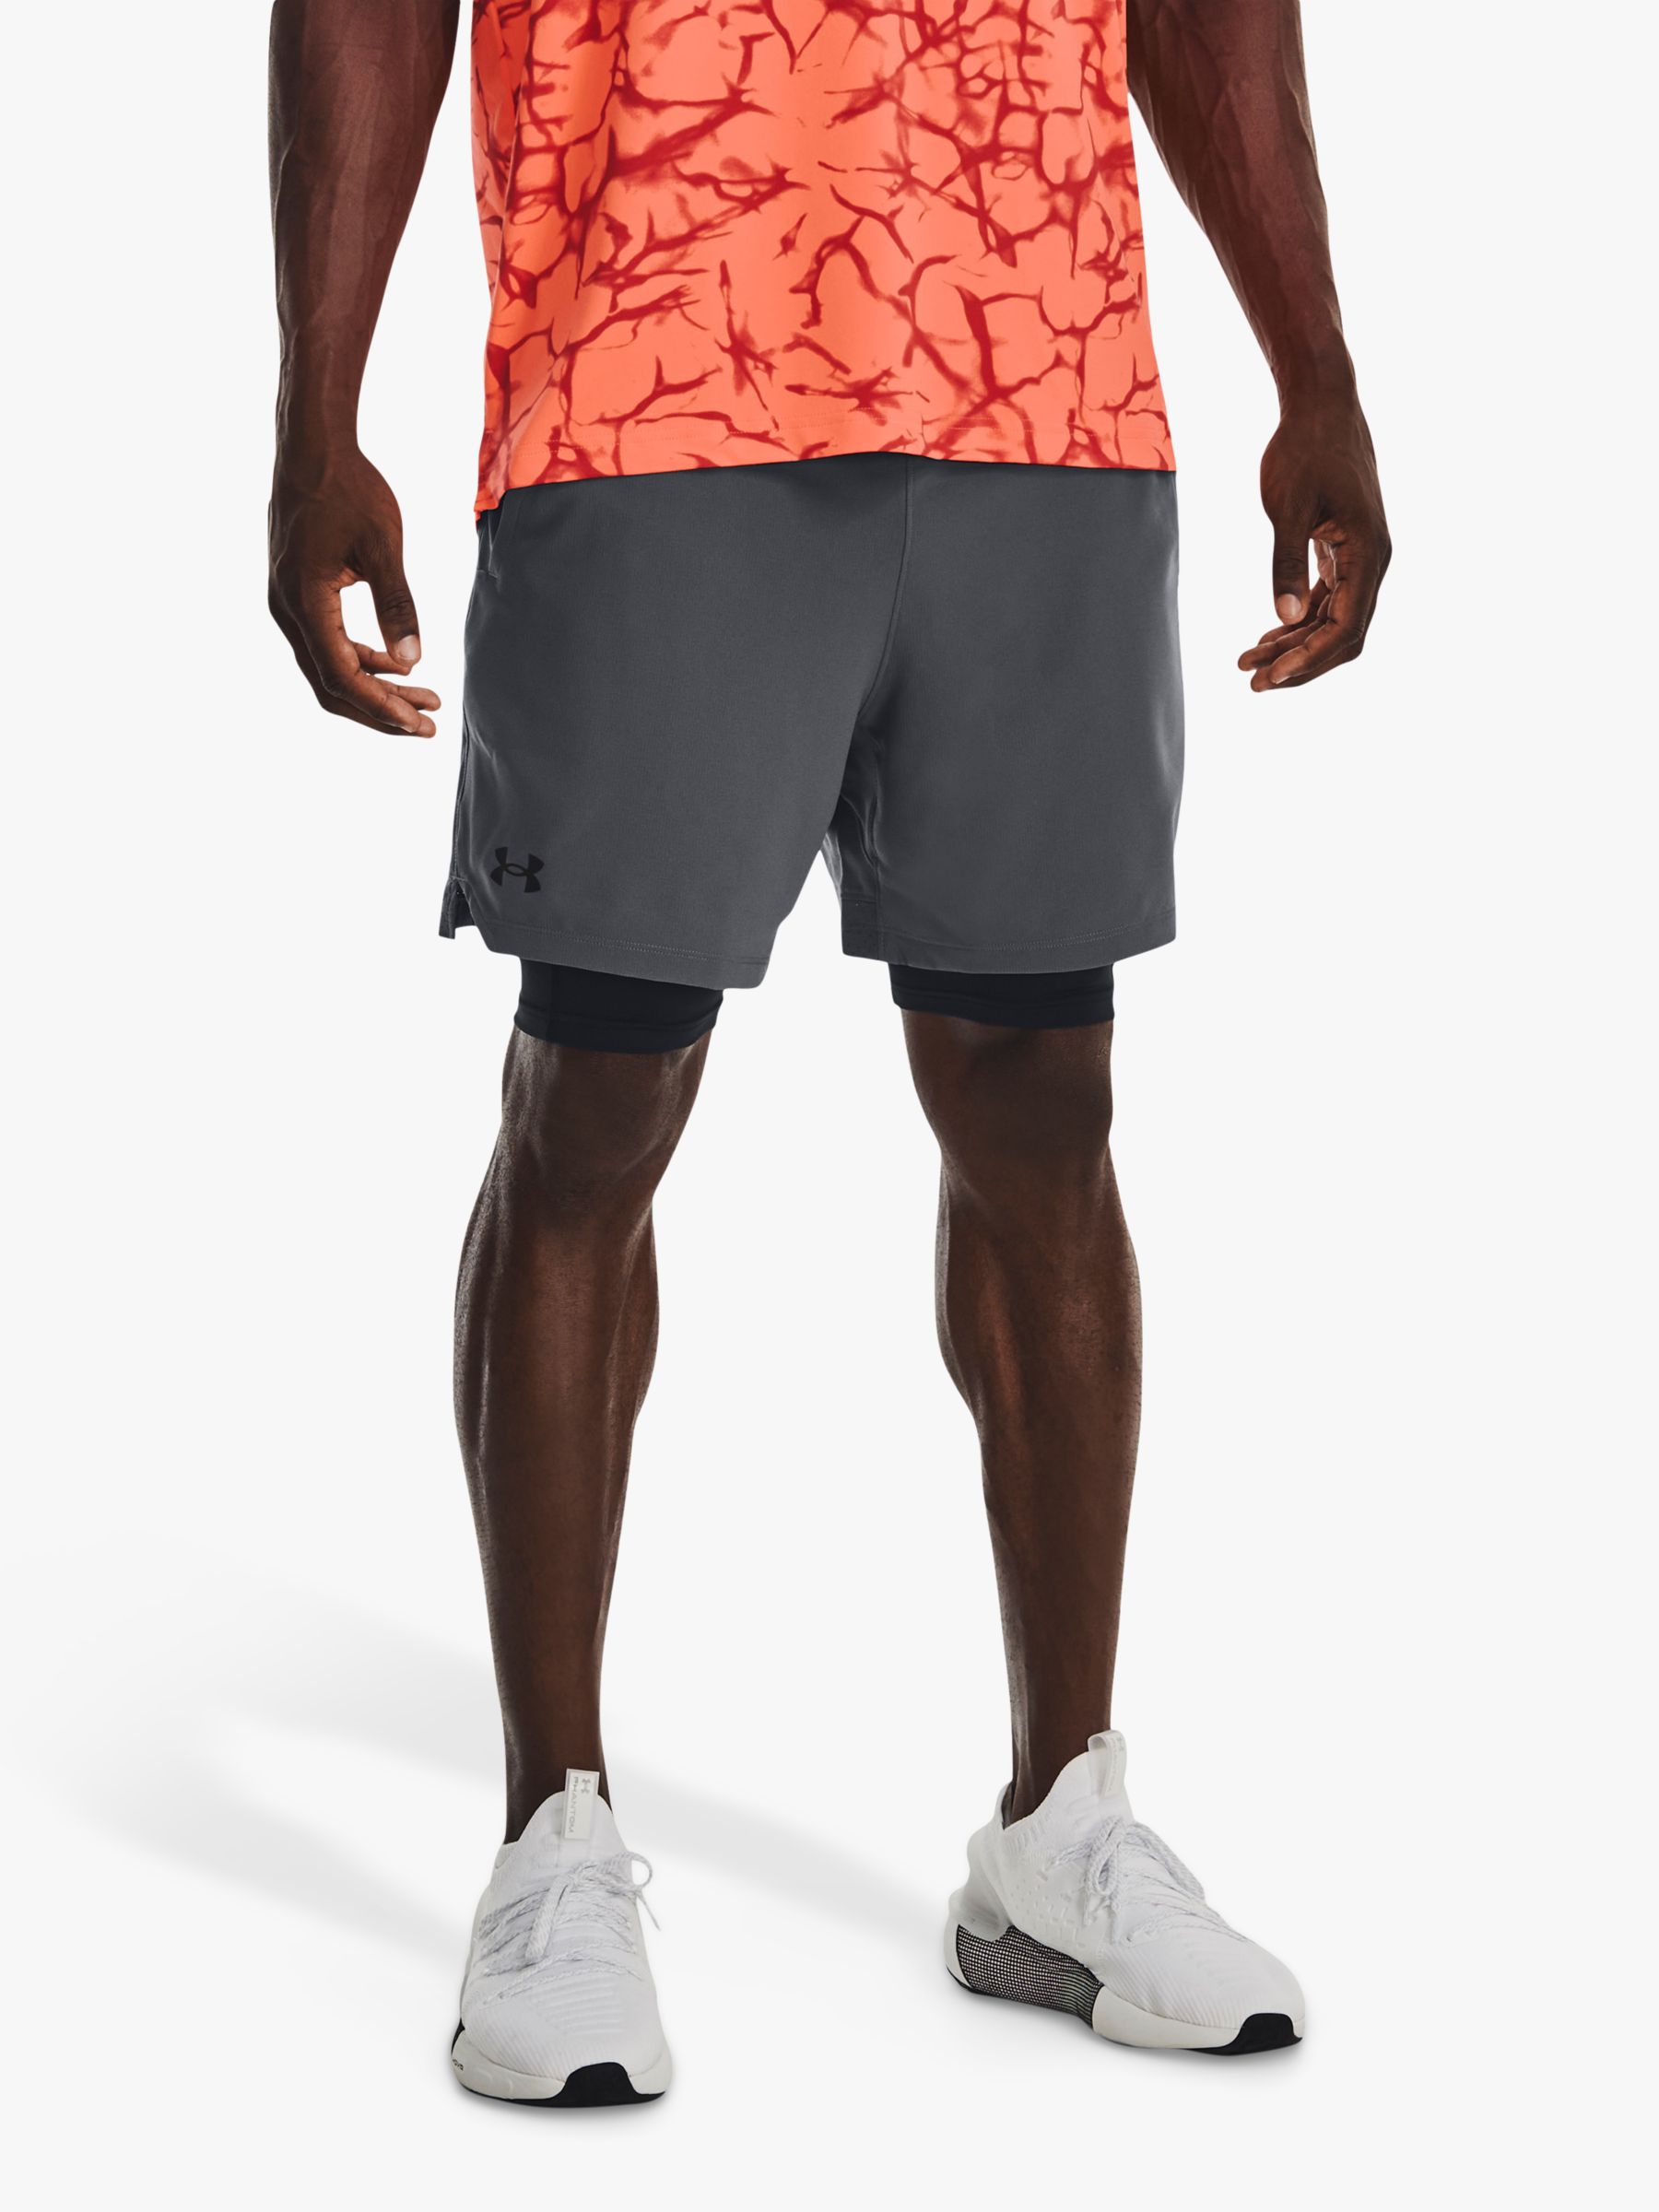 Under Armour Vanish Woven 2-in-1 Gym Shorts at John Lewis & Partners